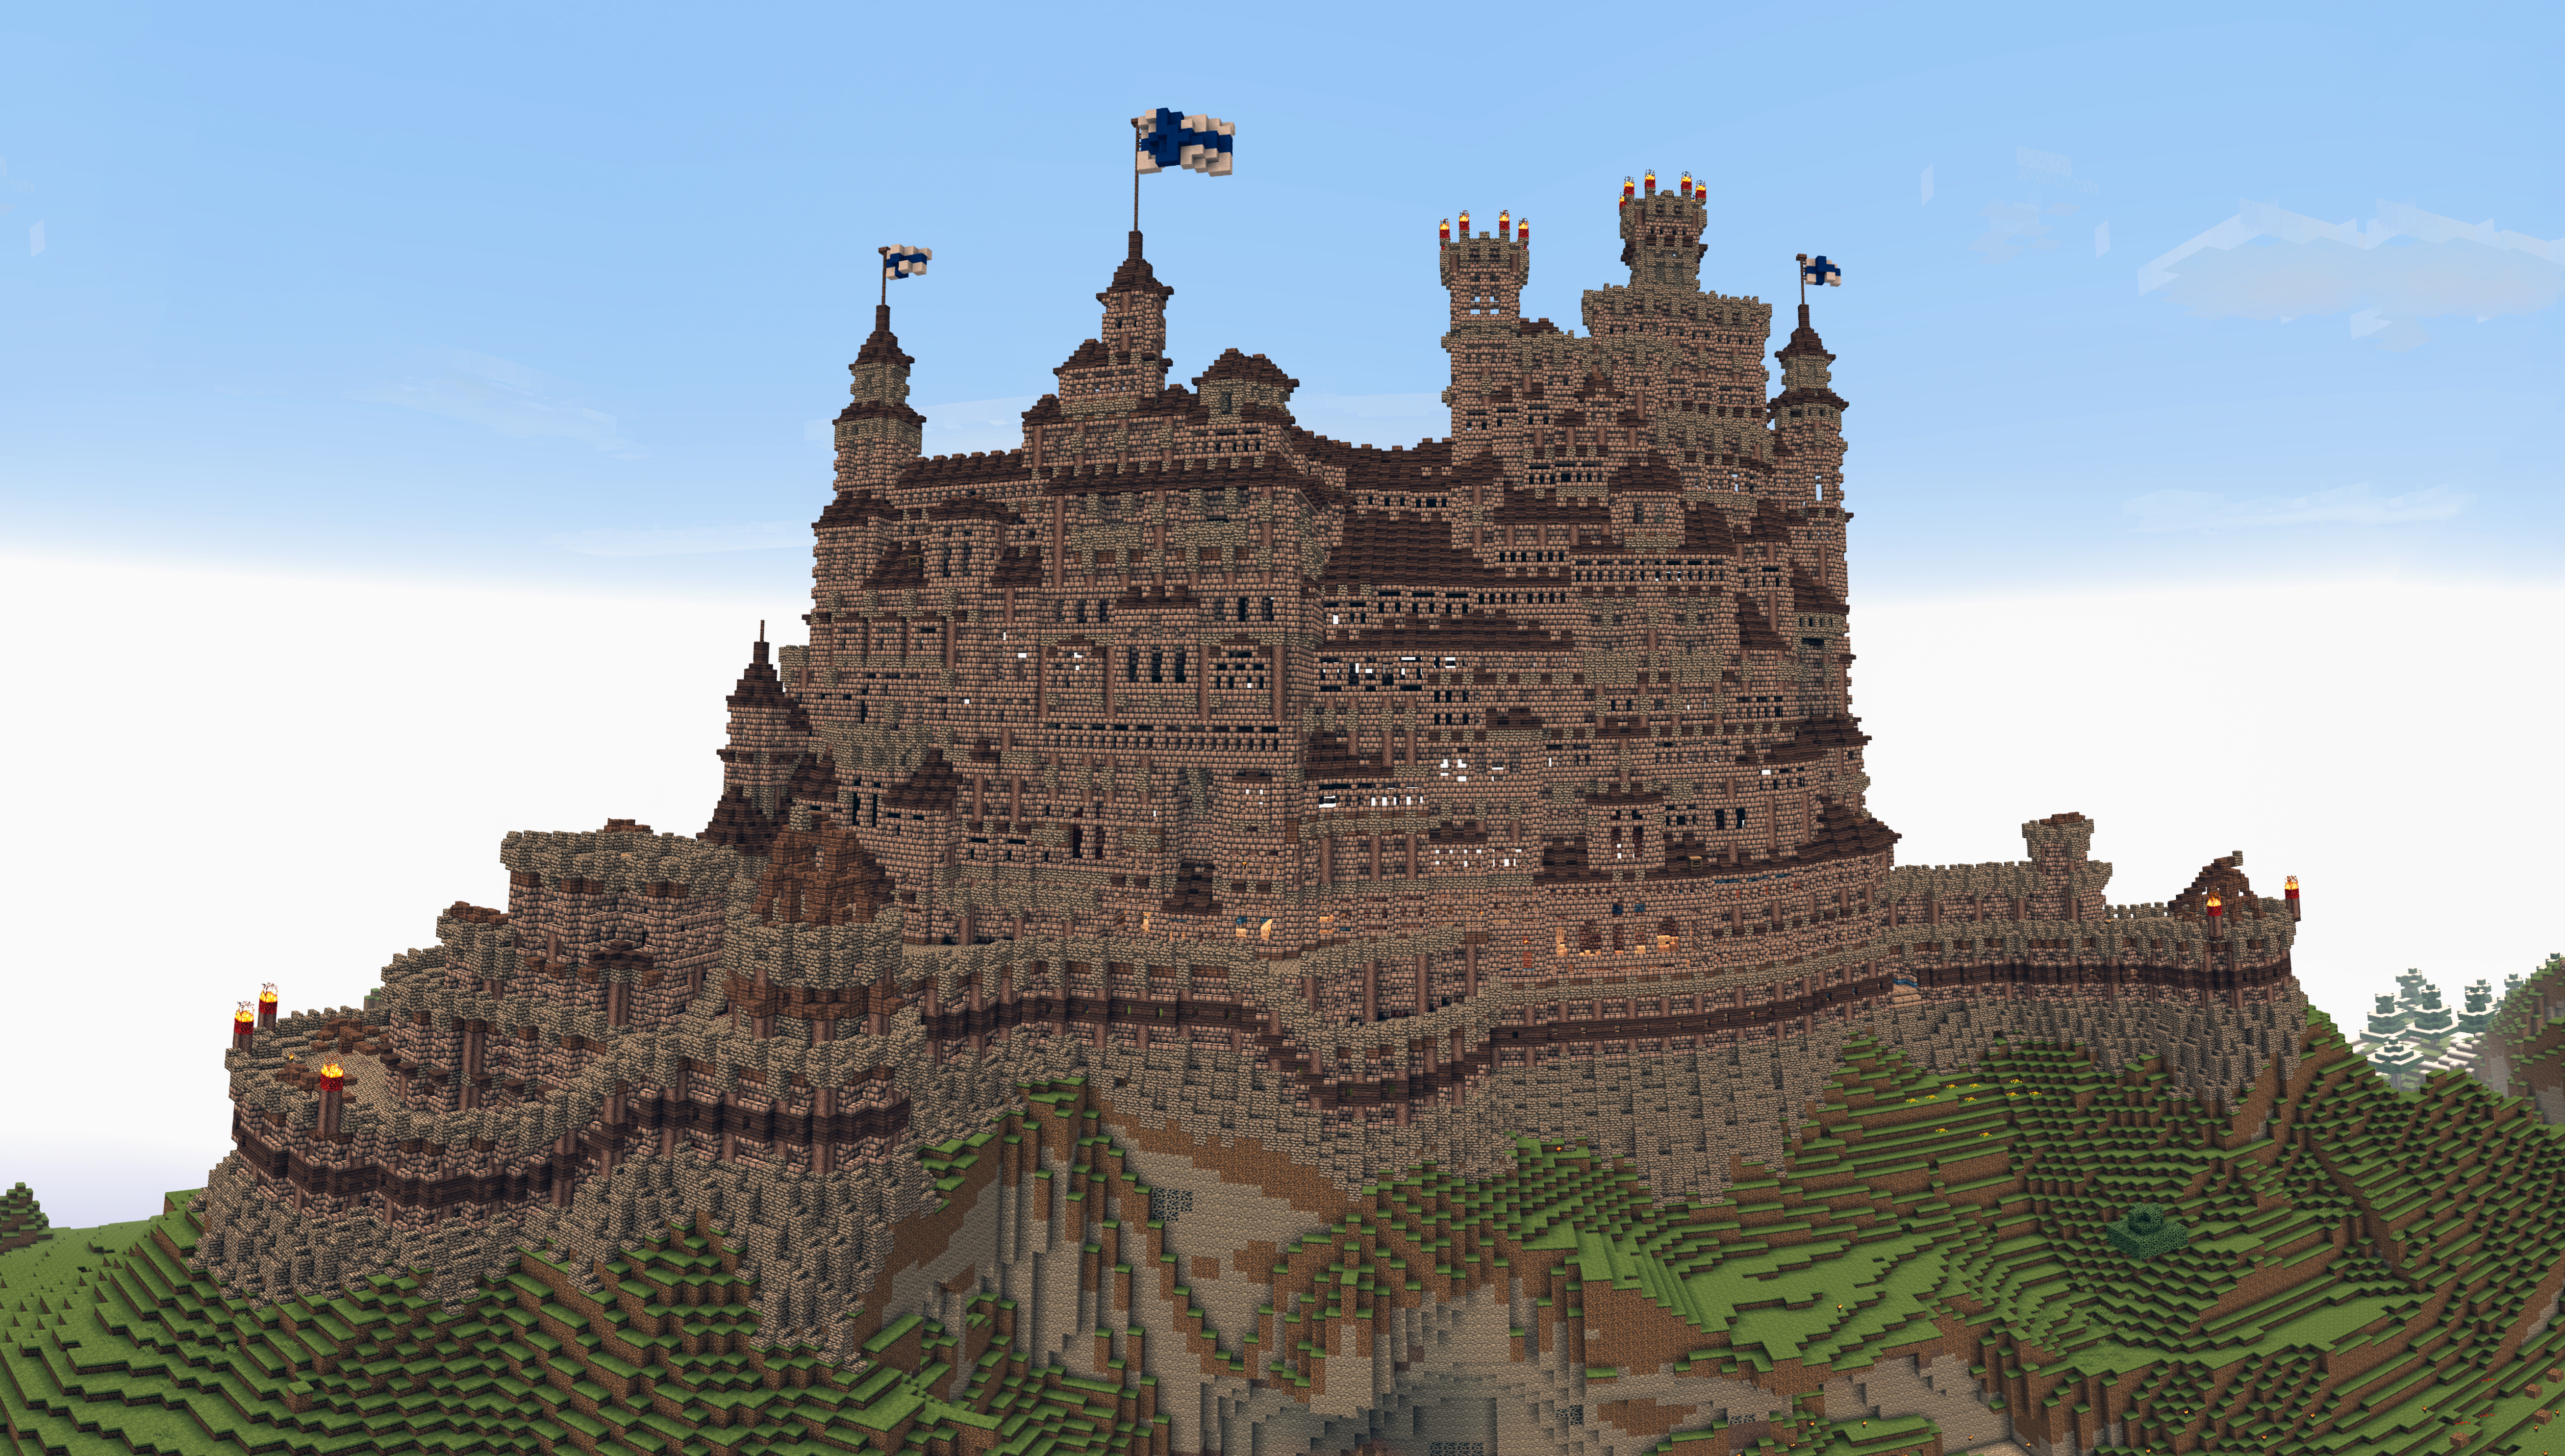 plaunitz-castle-an-improvised-hill-fortress-minecraft-project